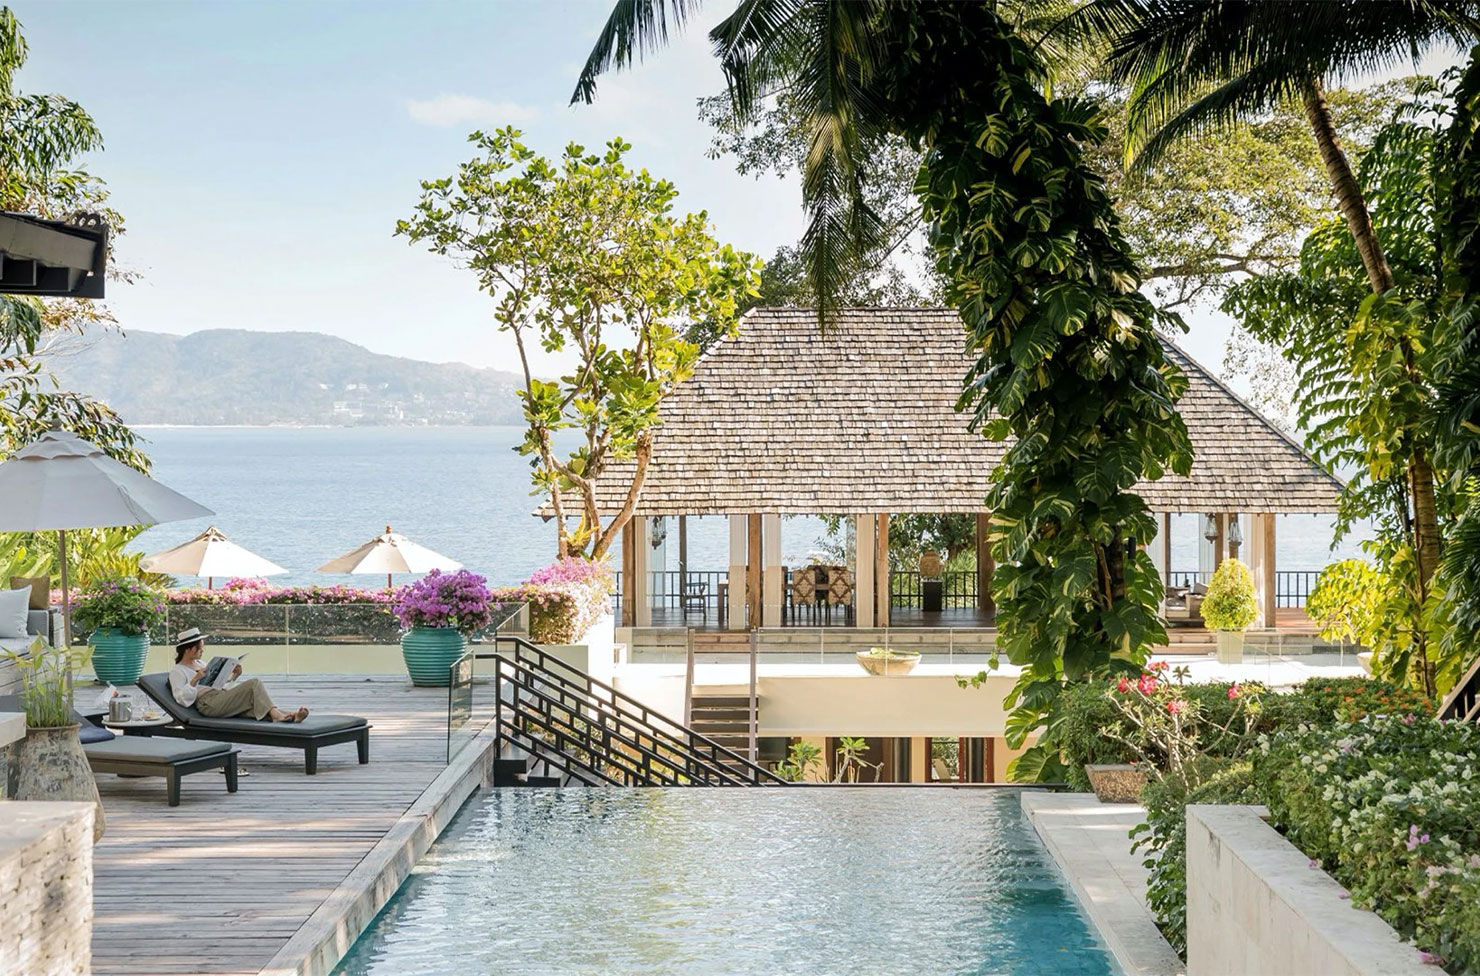 Trisara, one of the best hotels in Phuket